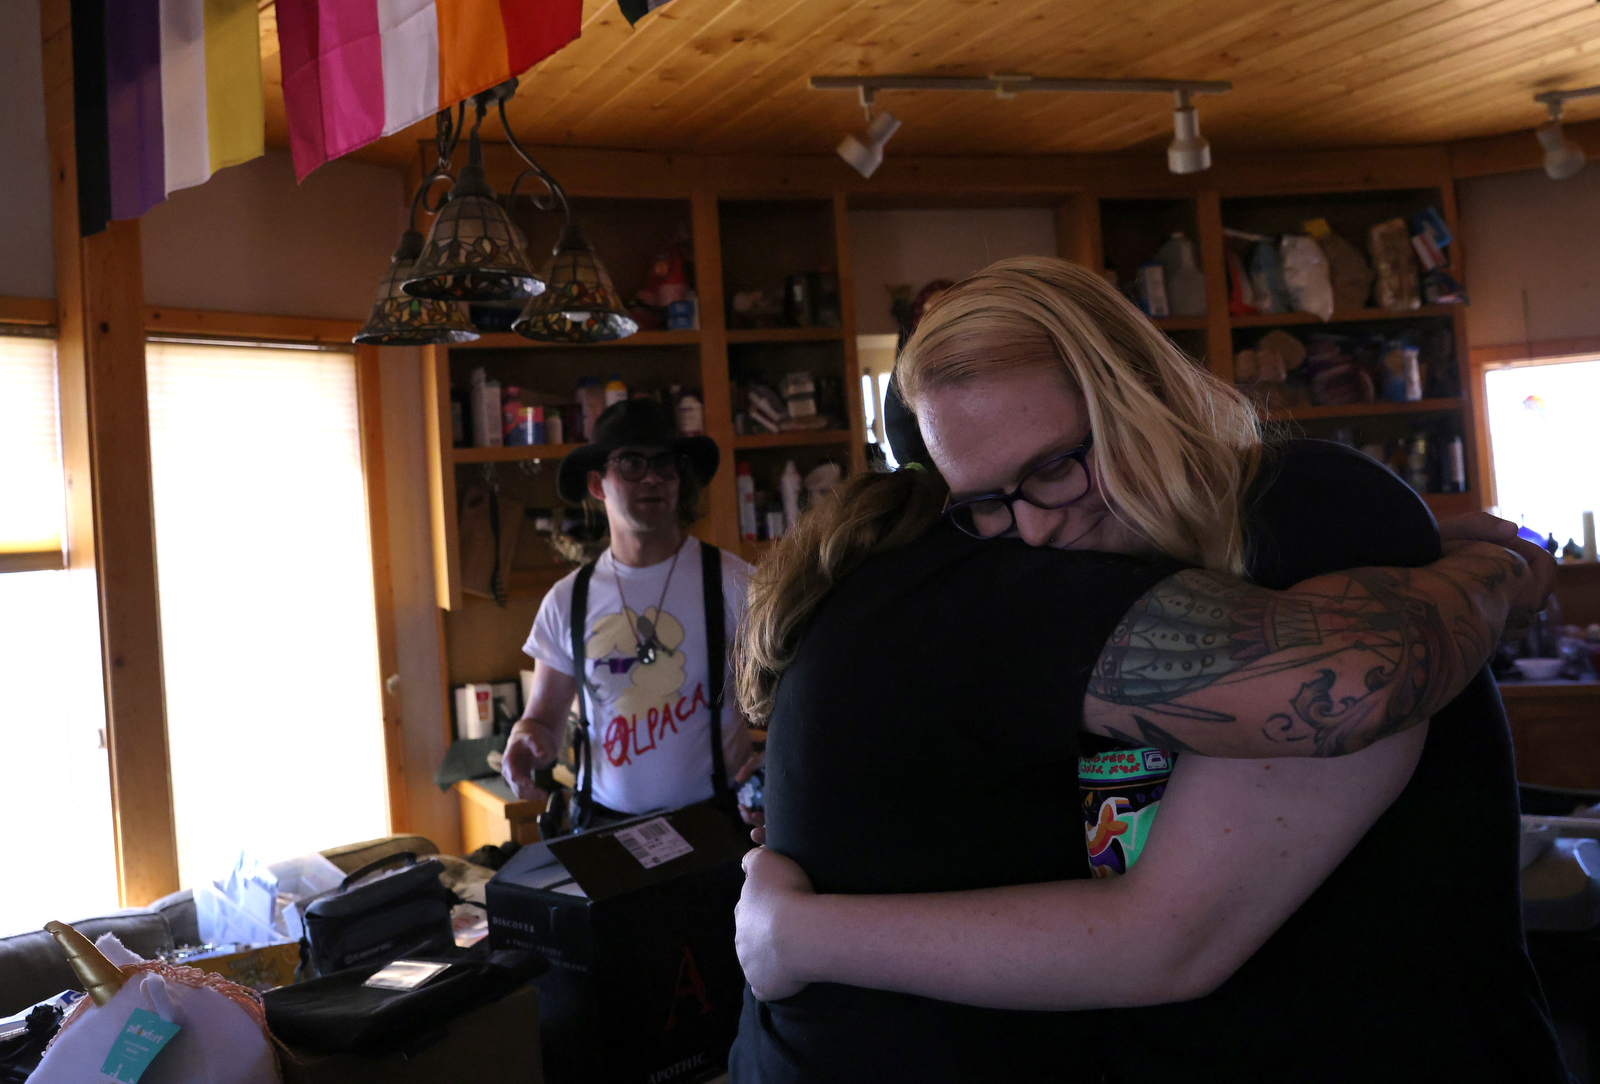 Penny Logue hugs one of her partners, Kathryn Gibes in their home.